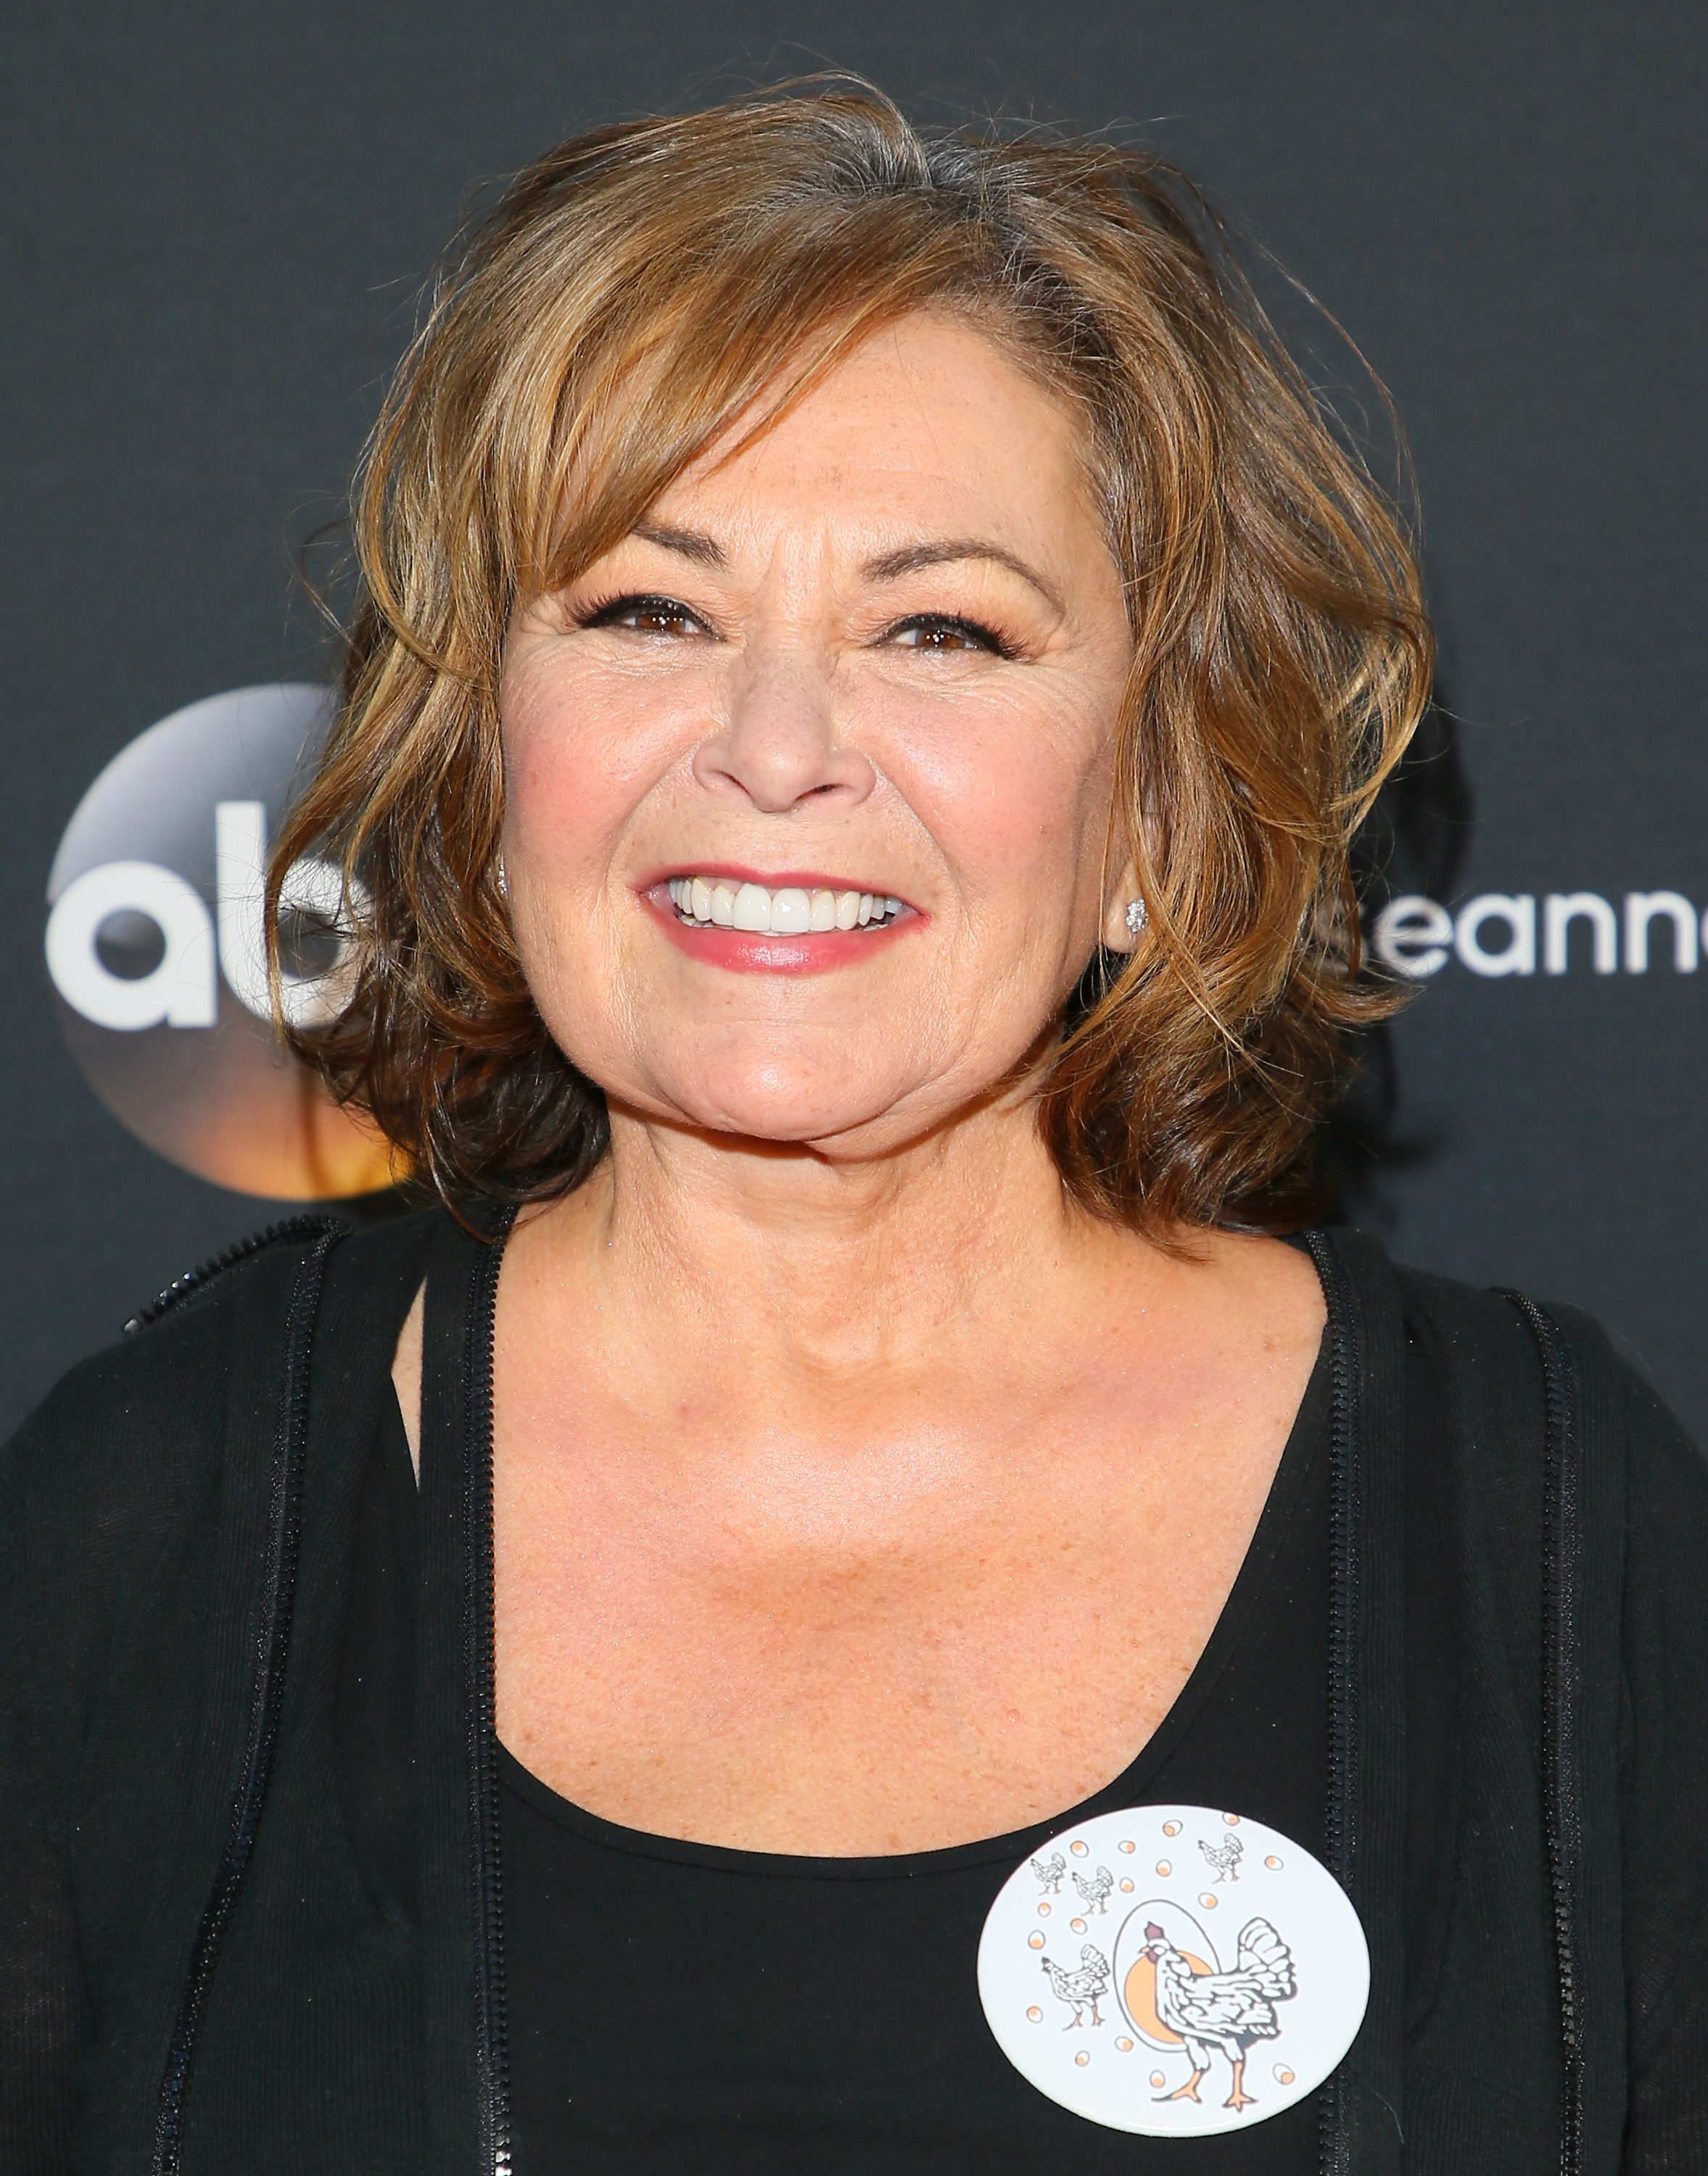 Roseanne Barr attends the premiere of "Roseanne," 2018 | Source: Getty Images